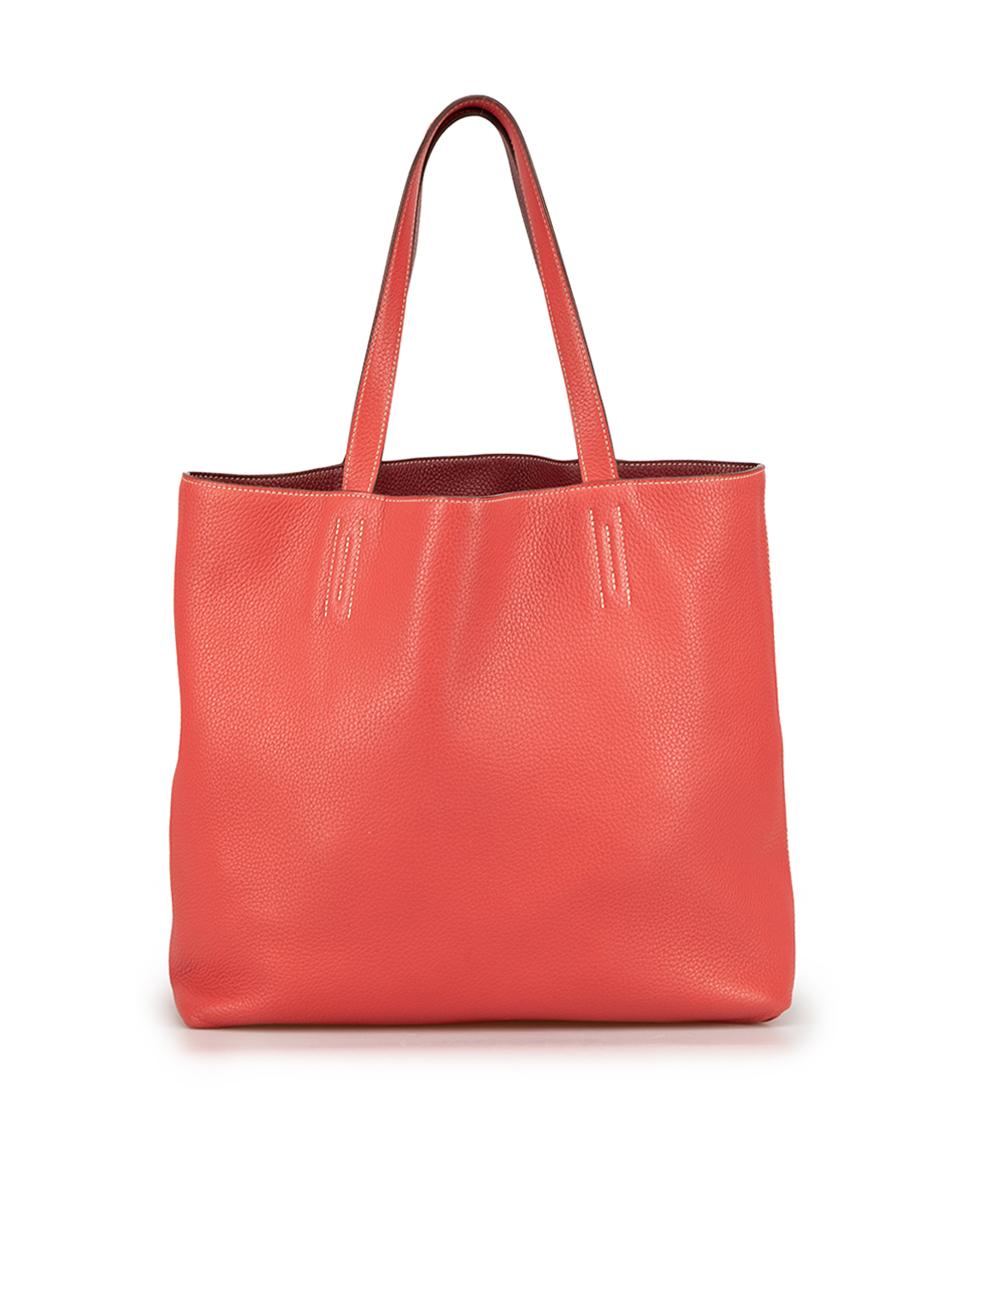 Hermès 2014 Rot Reversible Double Sens 36 Clemence Tote im Zustand „Gut“ im Angebot in London, GB